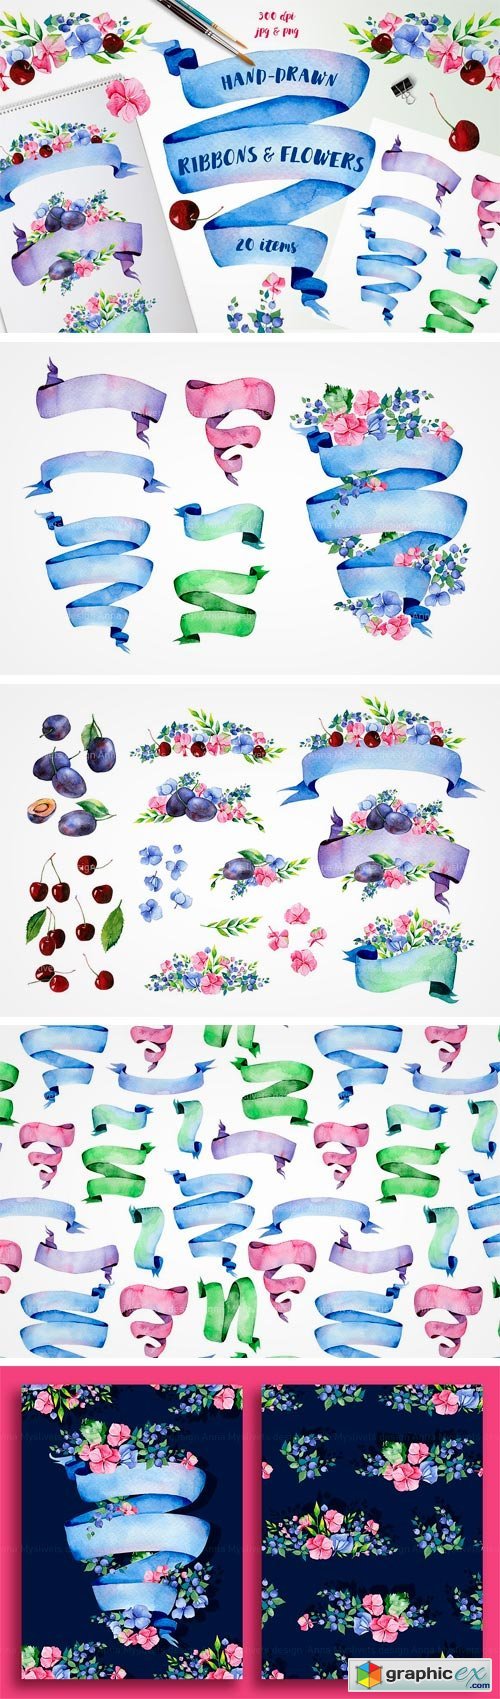 Ribbons and Flowers Set